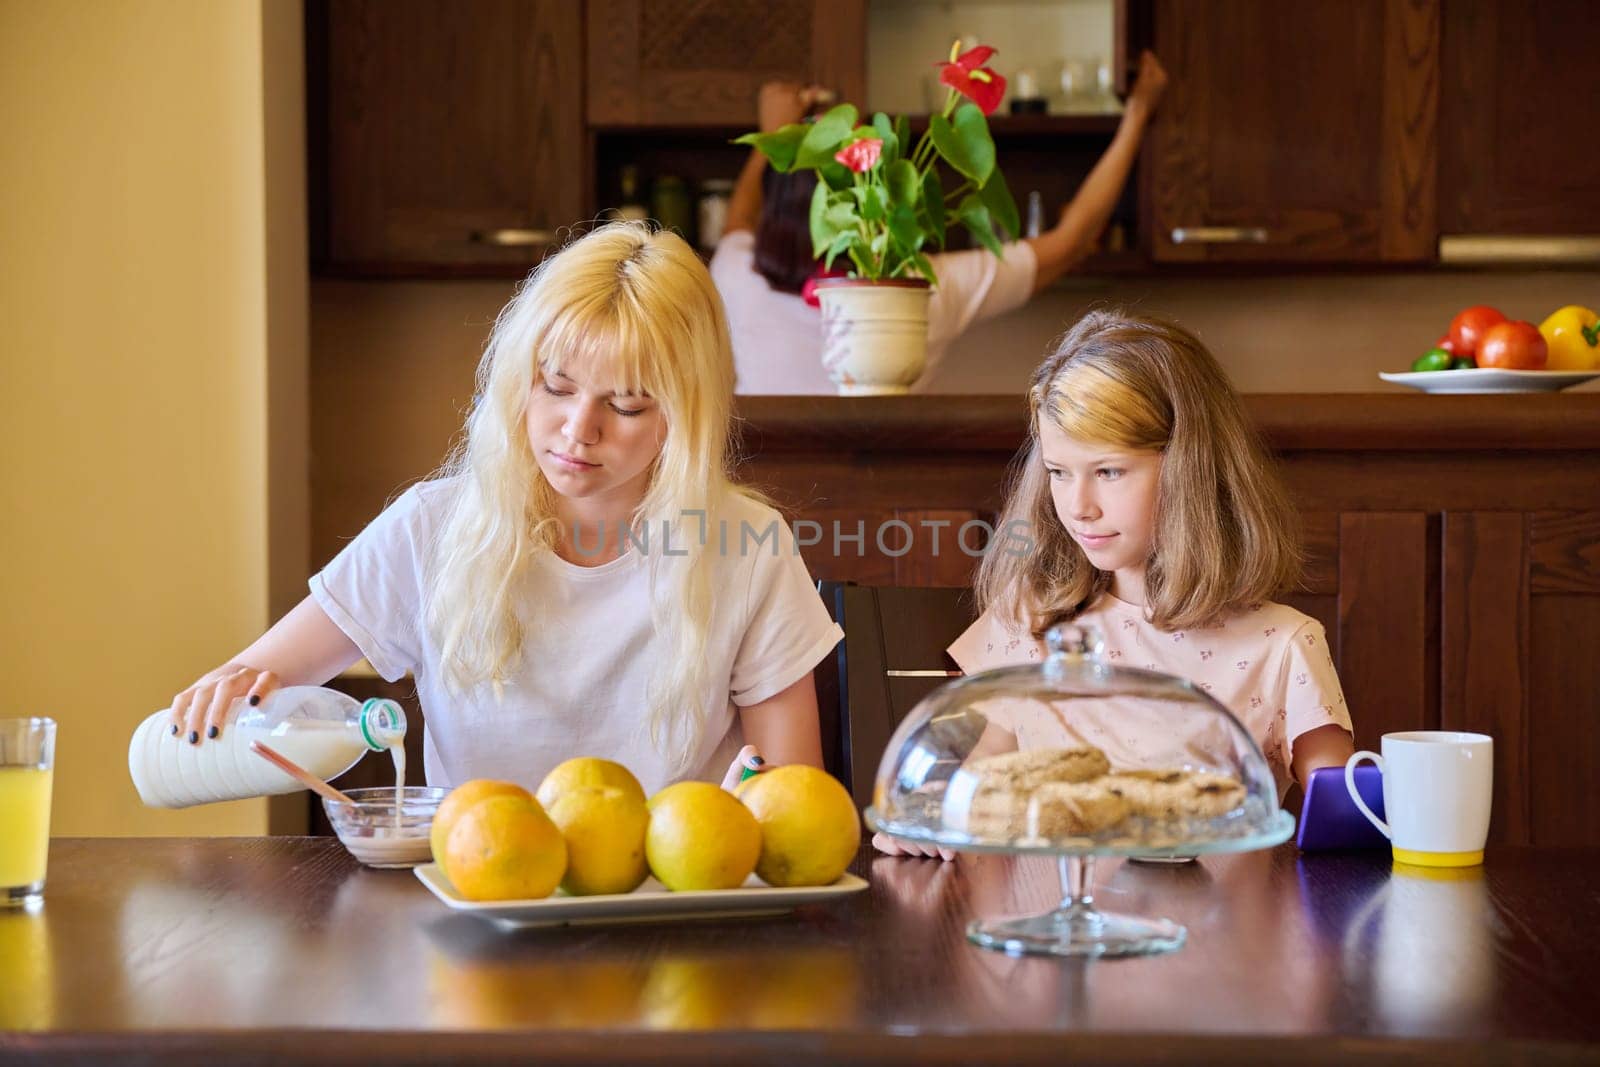 Children two sisters eating at home in the kitchen, teenage and preteen girls having breakfast together, mother cooking. Family, people, children, food, lifestyle concept